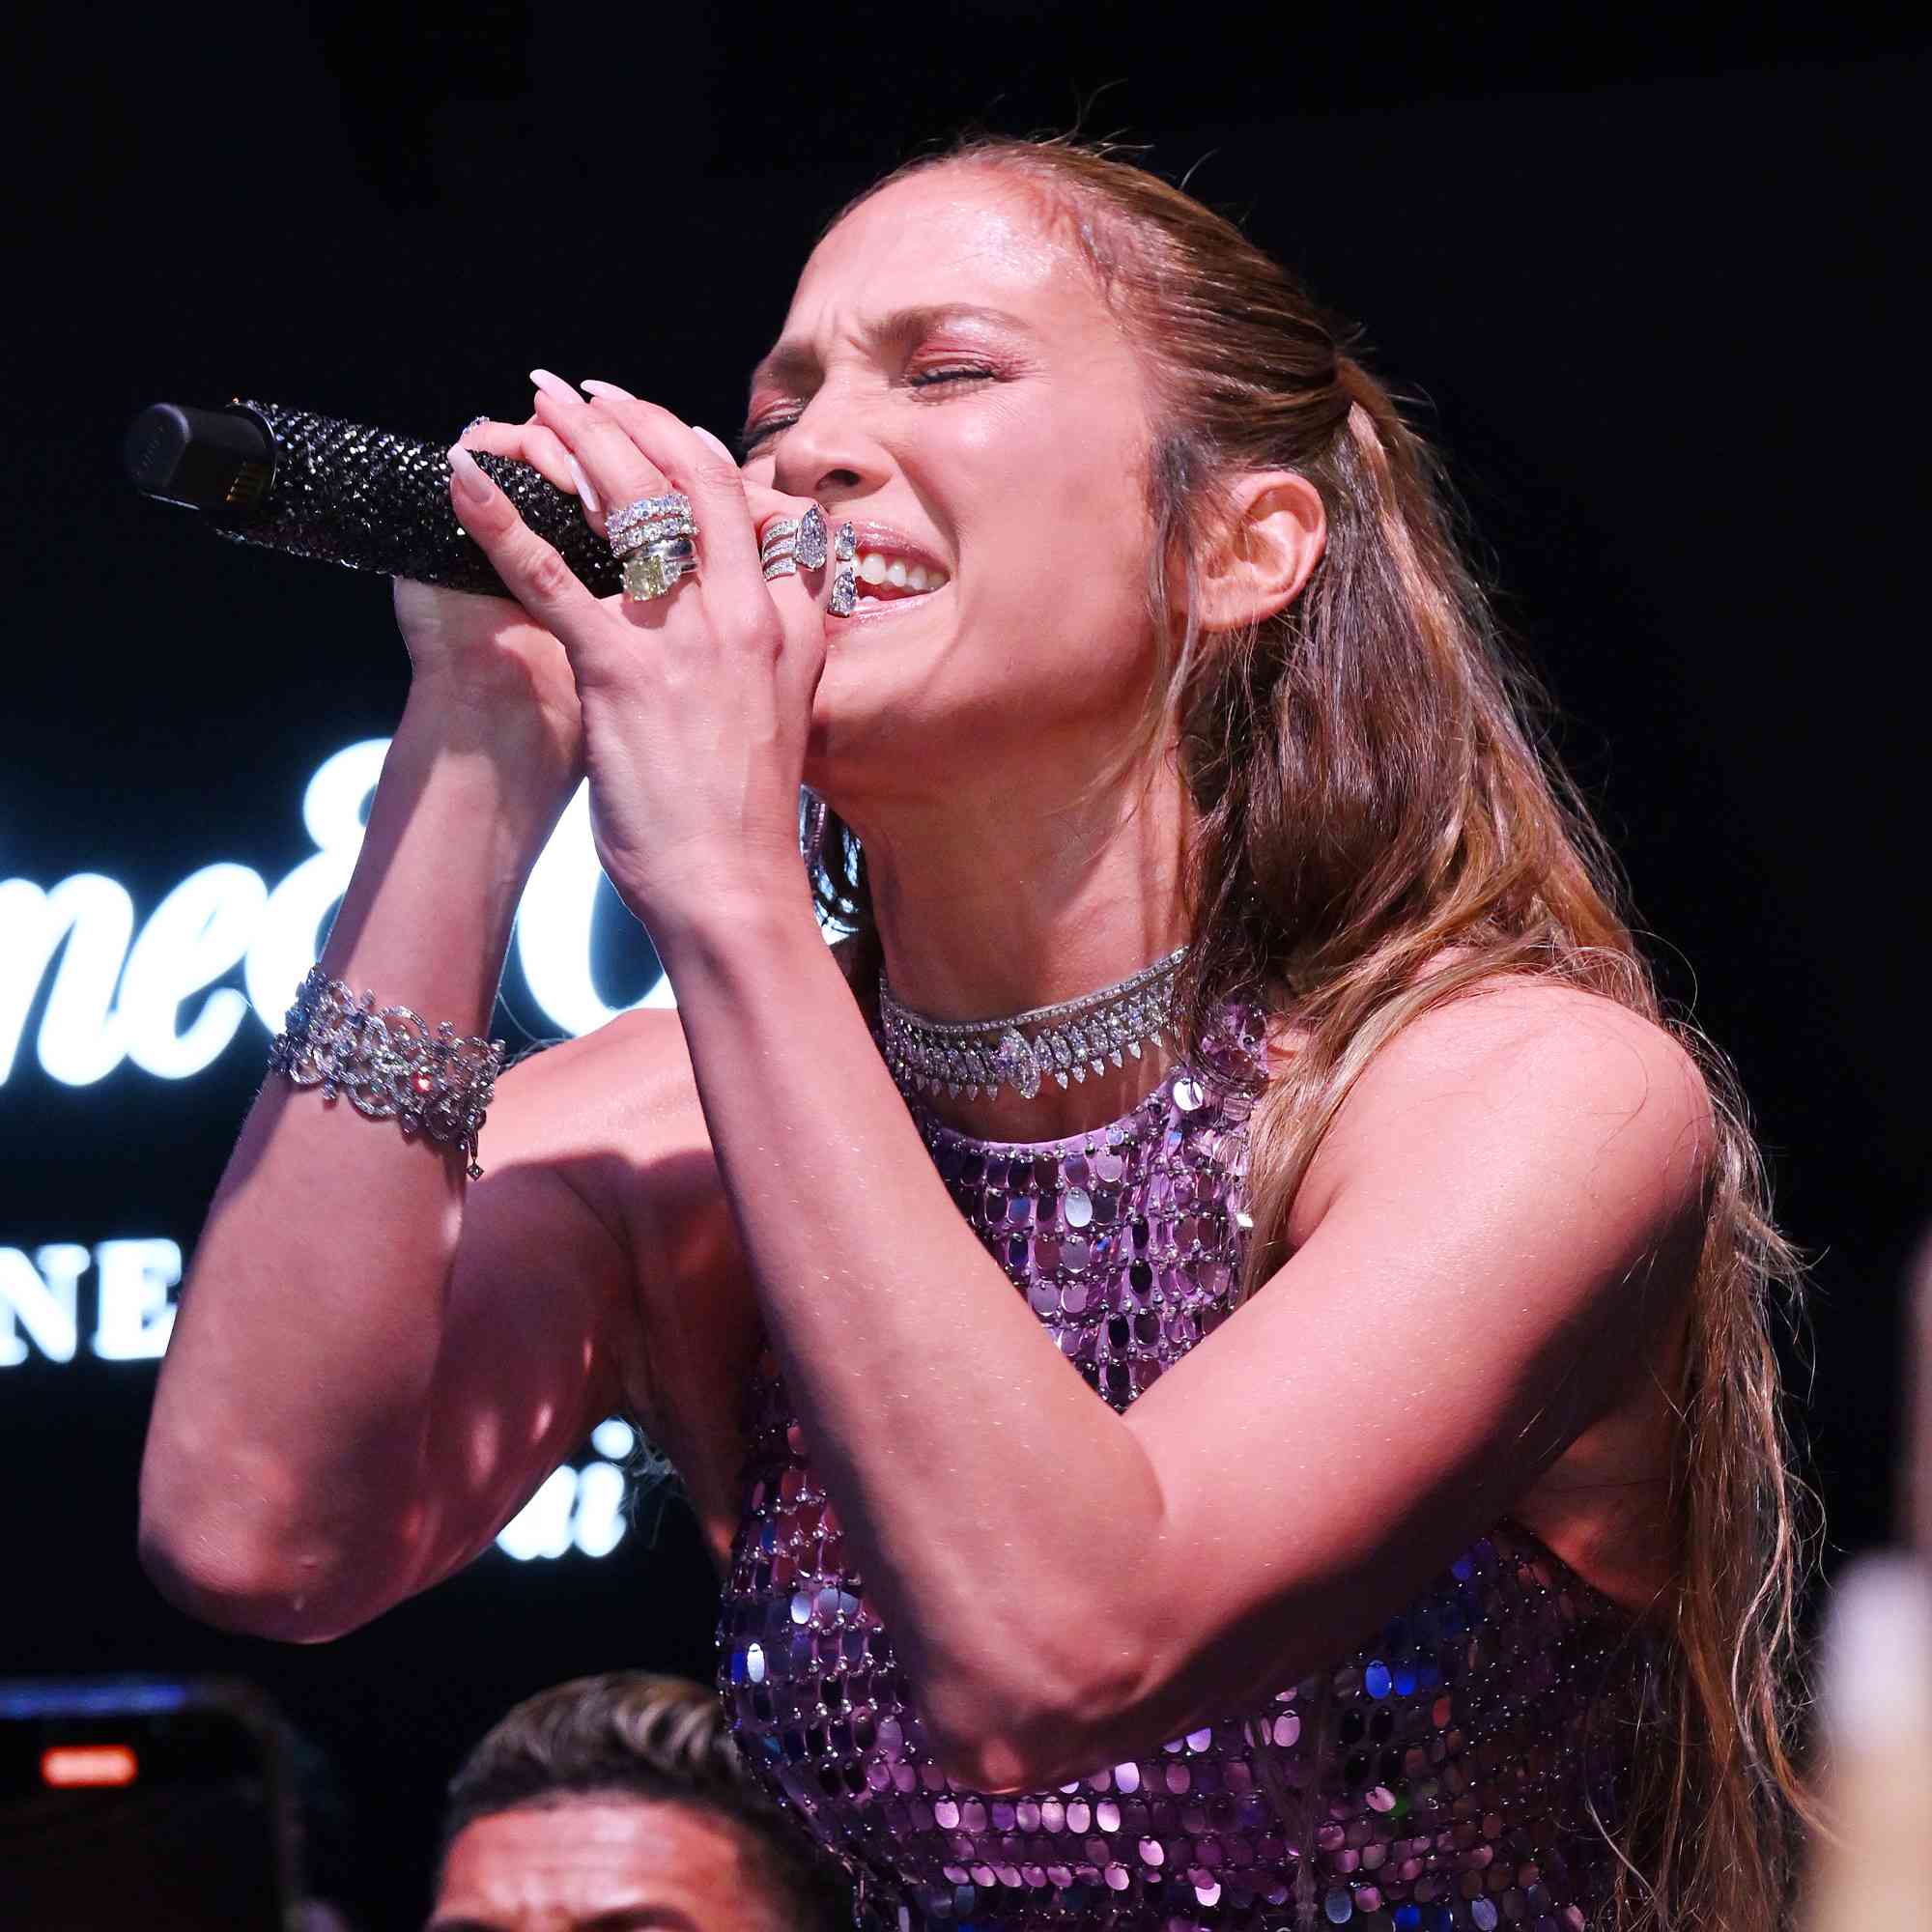 Jennifer Lopez performs at Sphere afterparty during the Grand Opening of One&Only One 